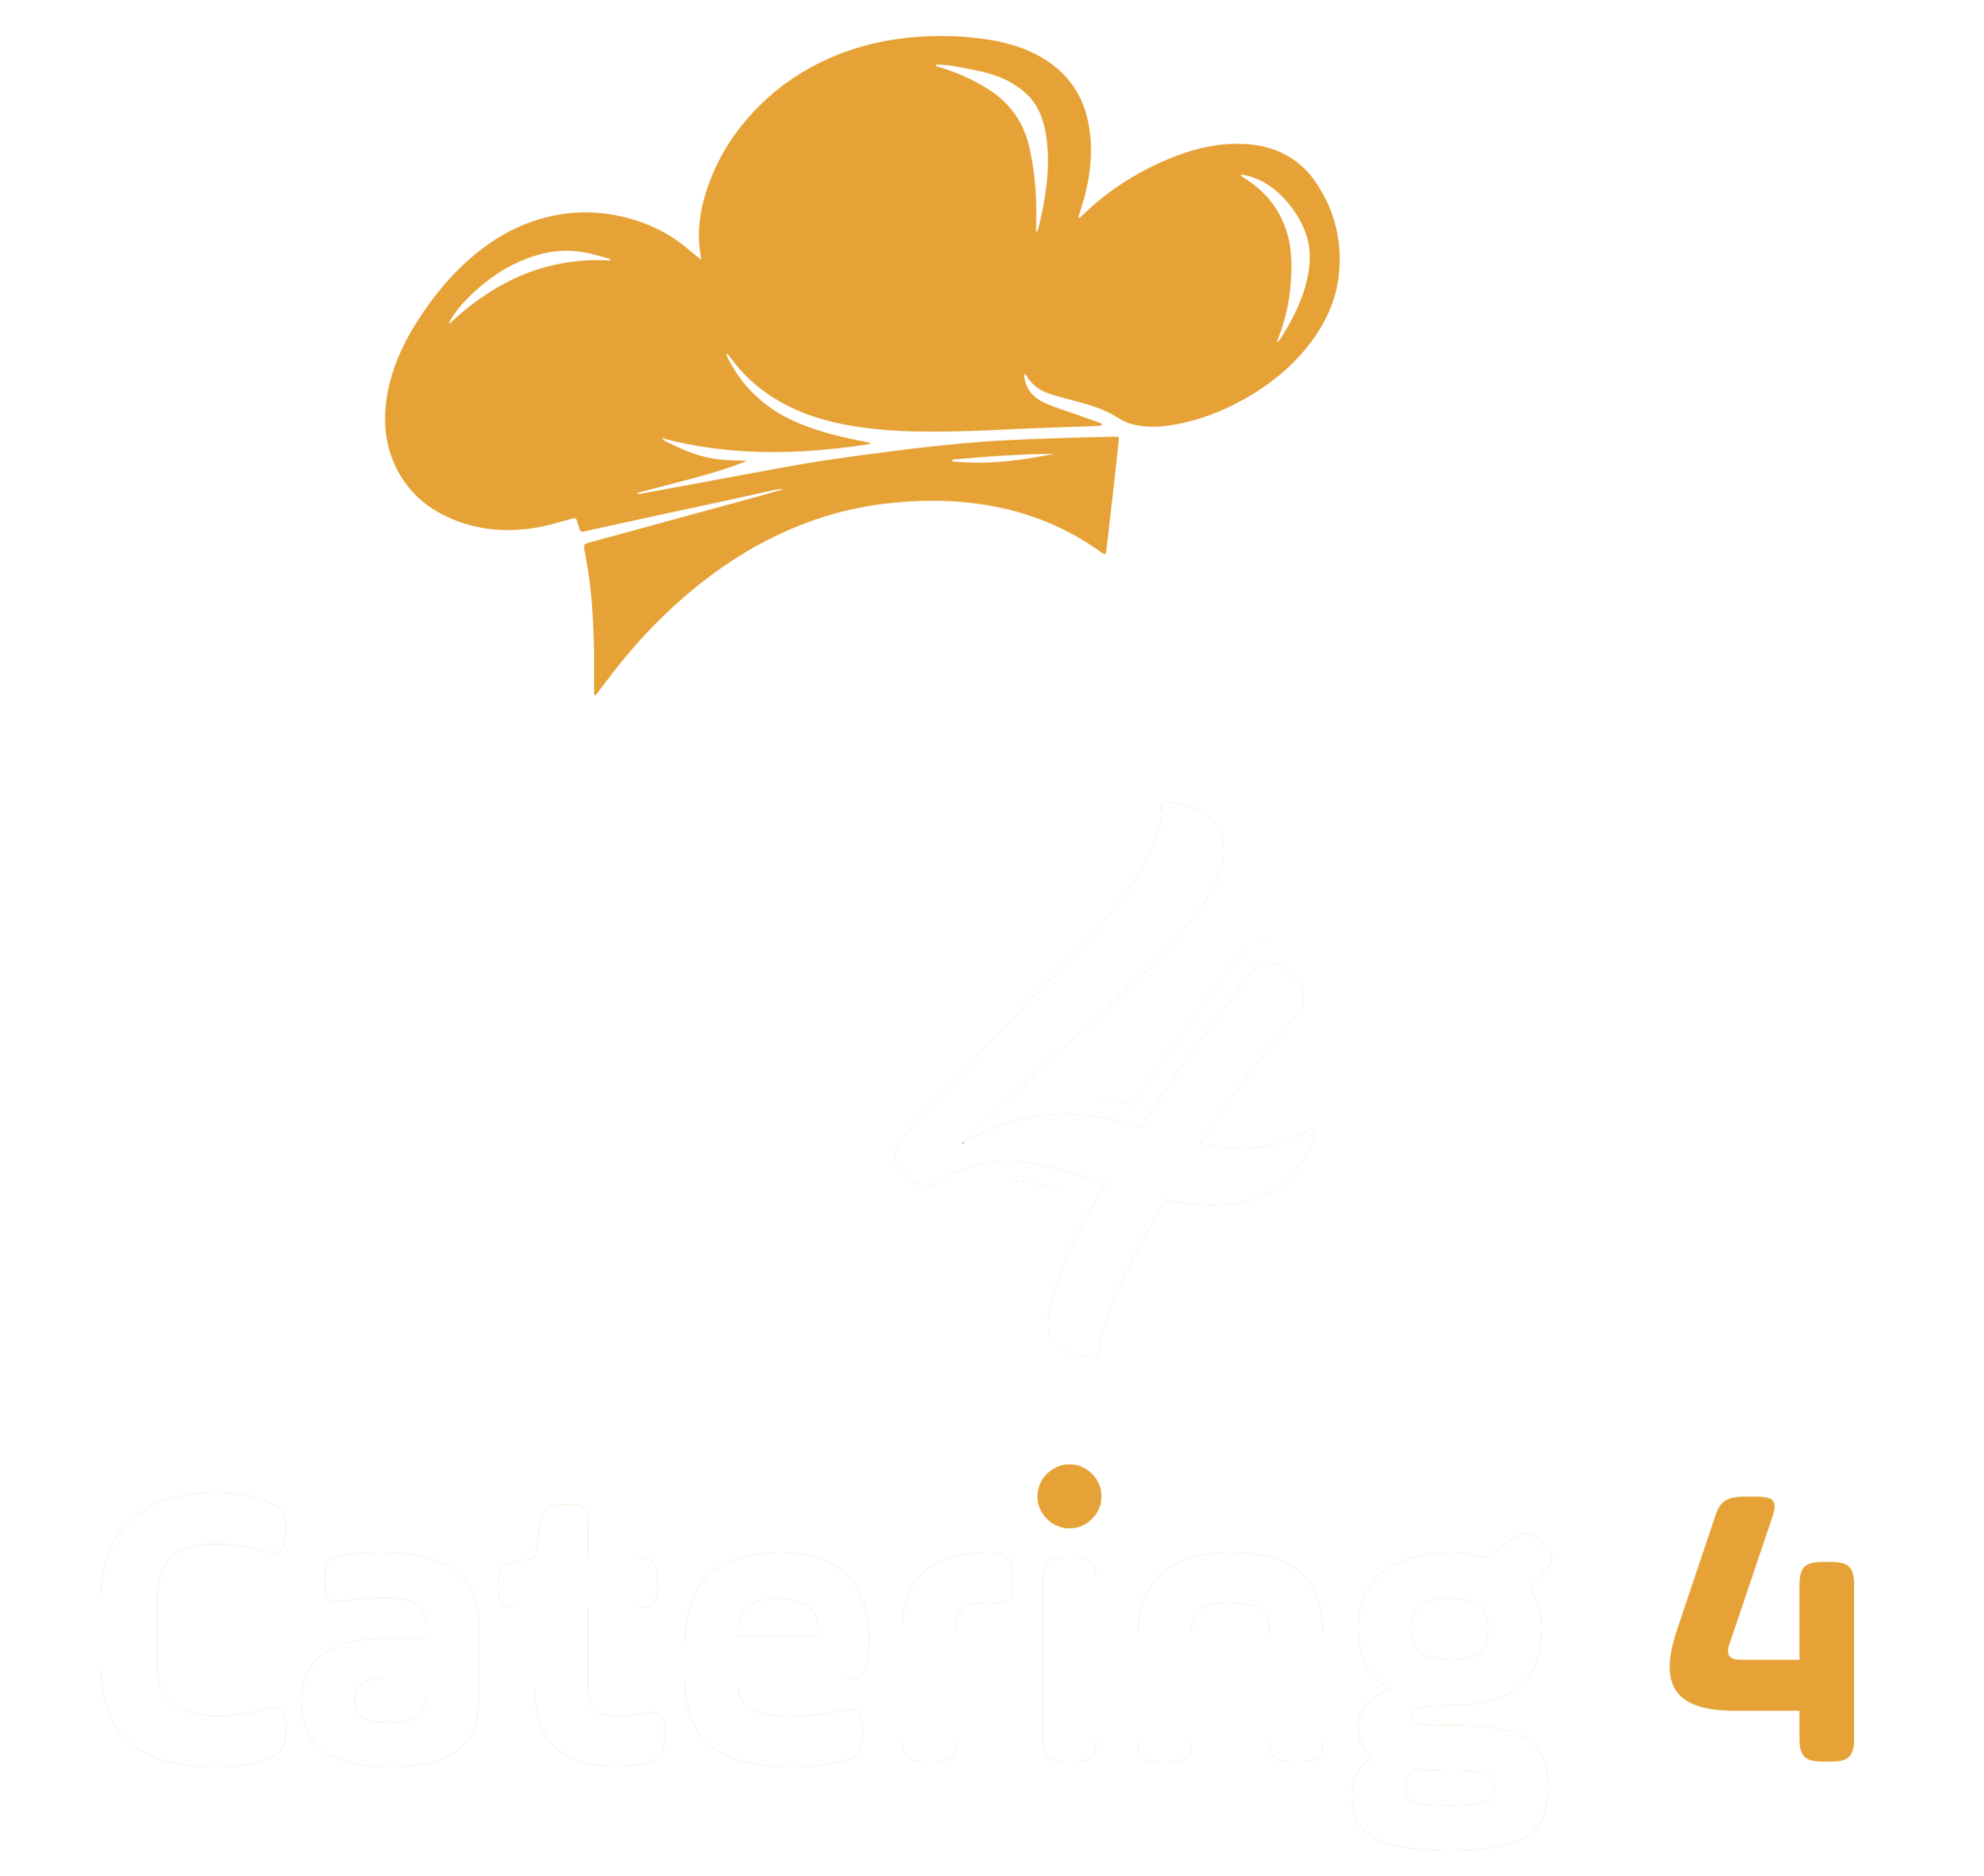 Catering 4